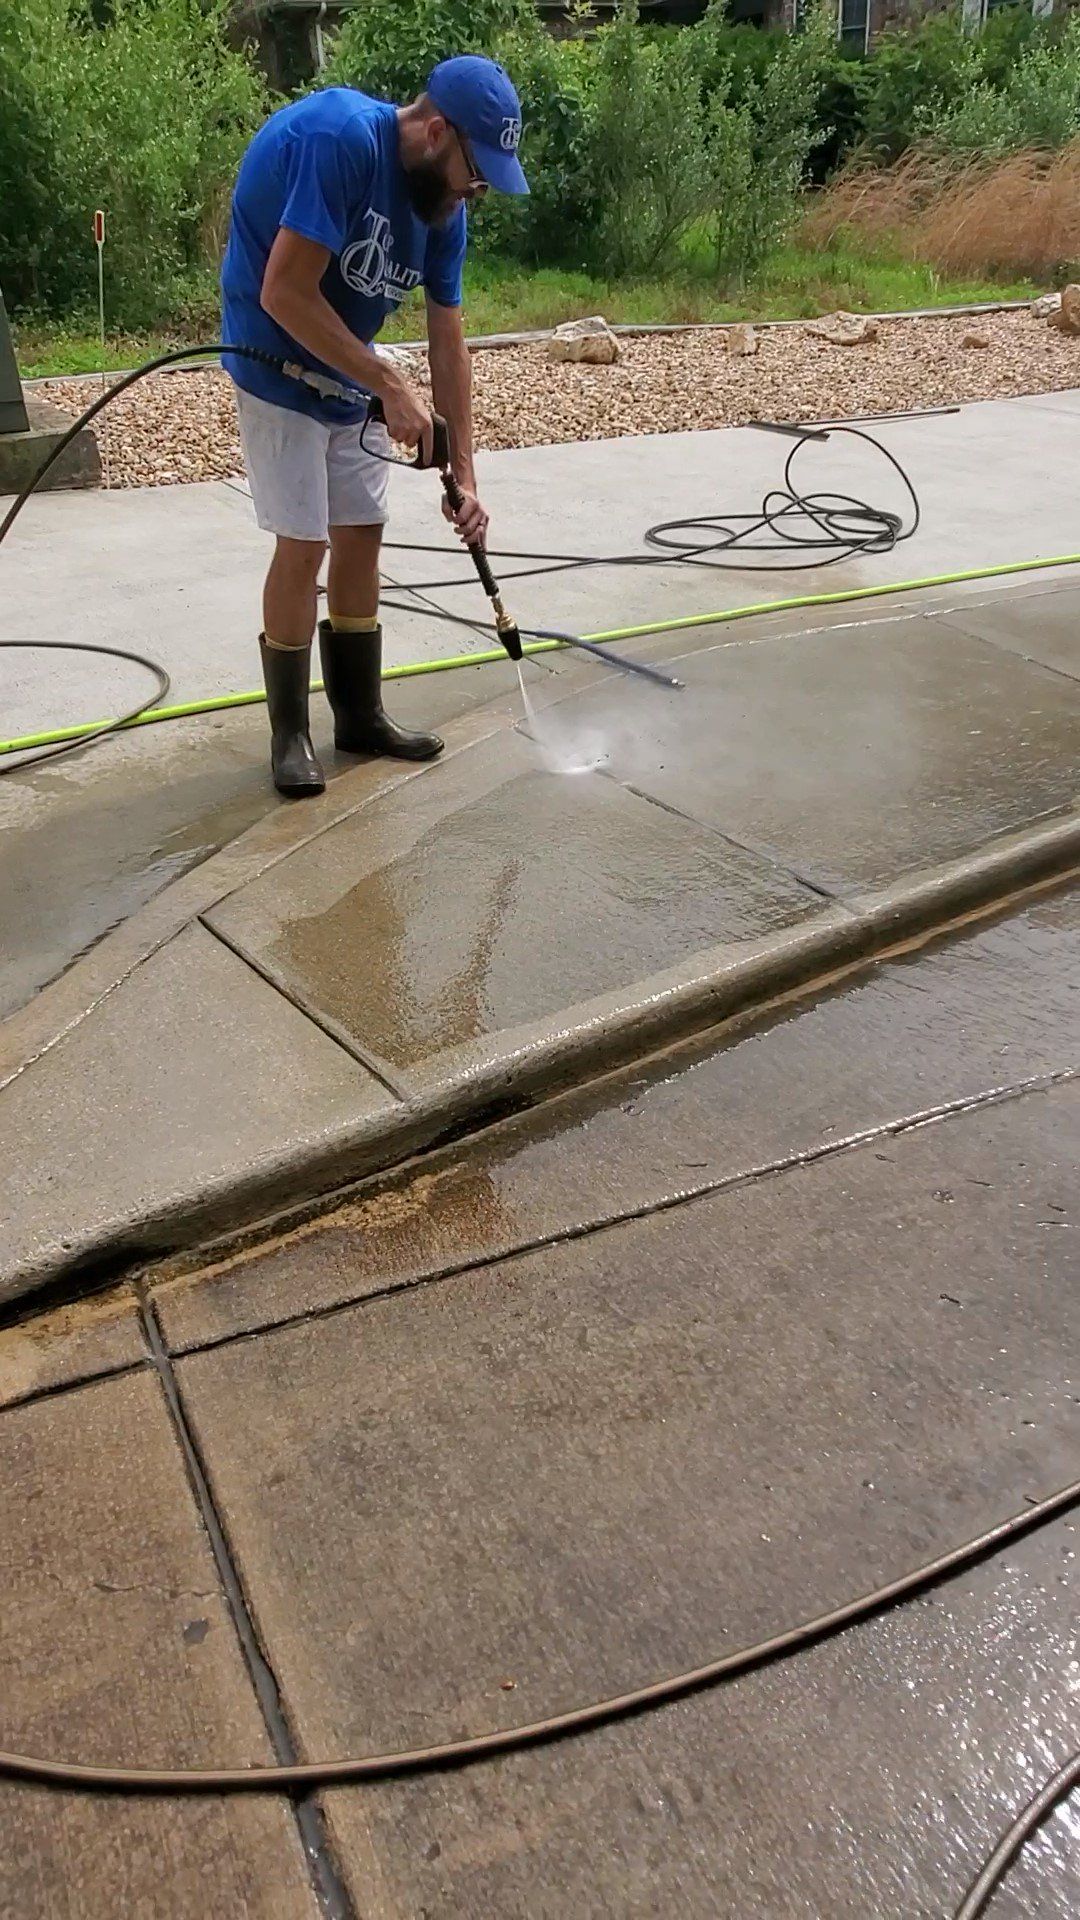 A man is using a high pressure washer to clean a concrete driveway.